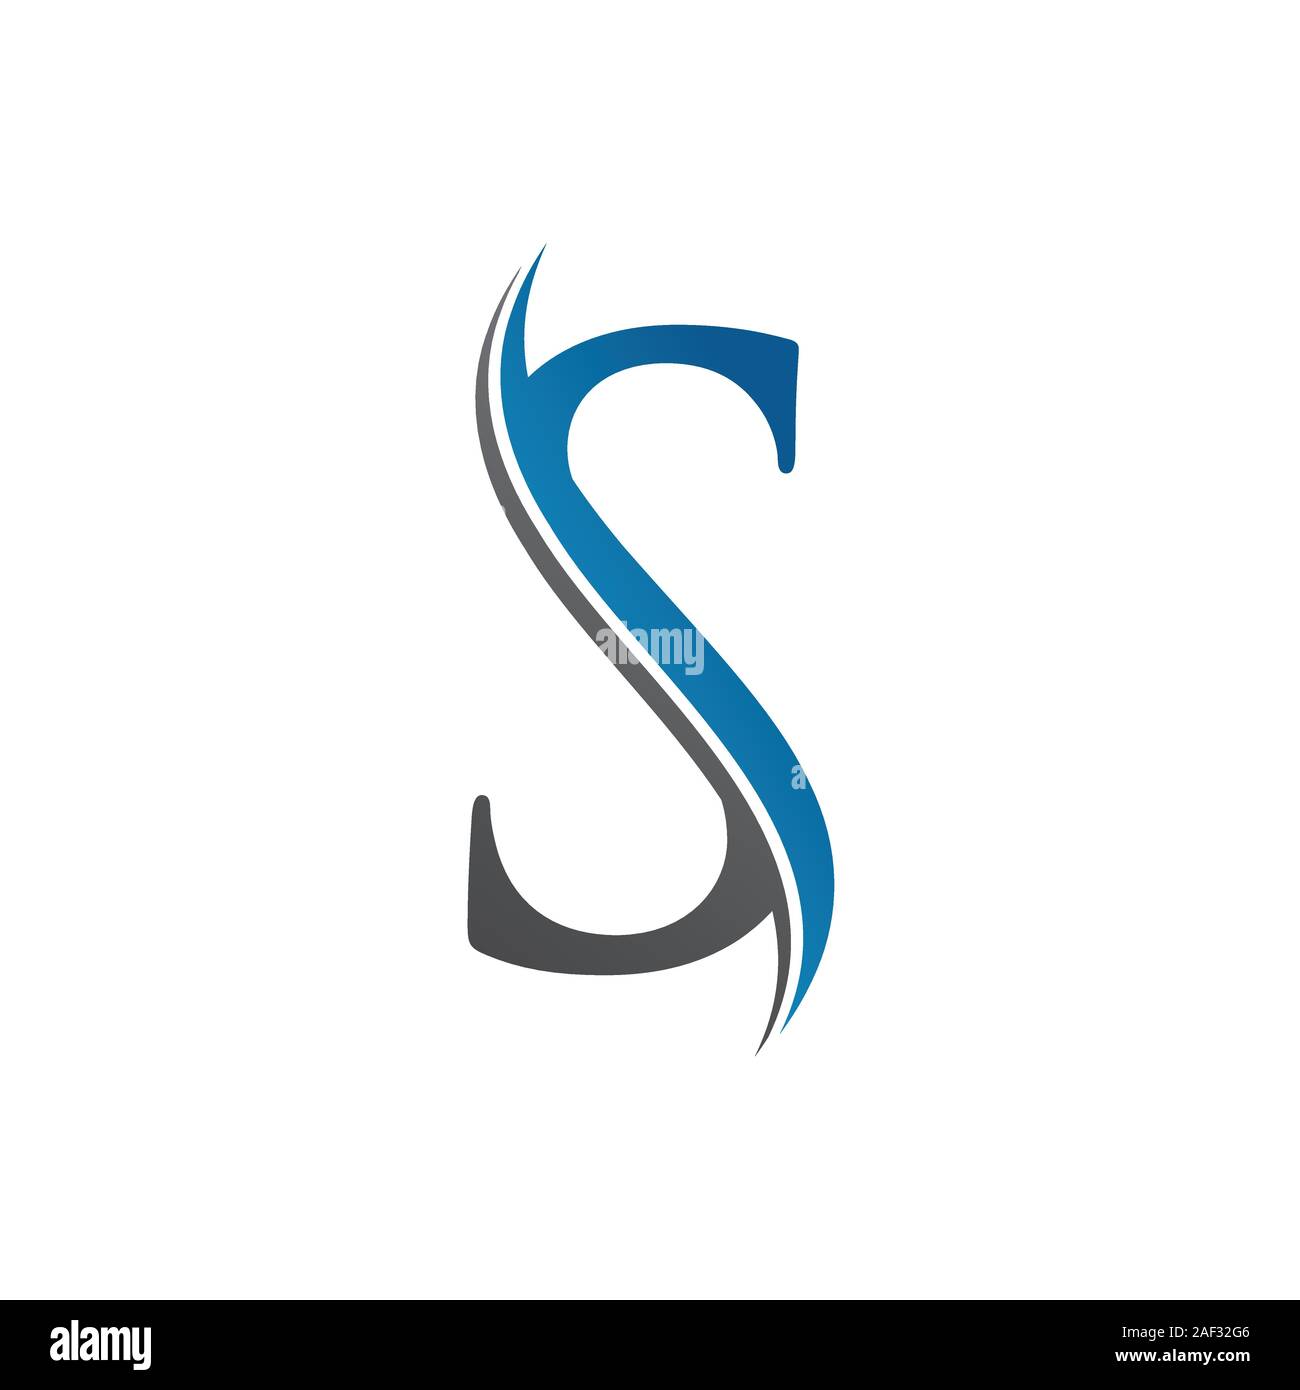 Initial Letter S Logo With Creative Modern Business Typography Vector Template Creative Abstract Letter S Logo Vector S Logo Design Stock Vector Image Art Alamy